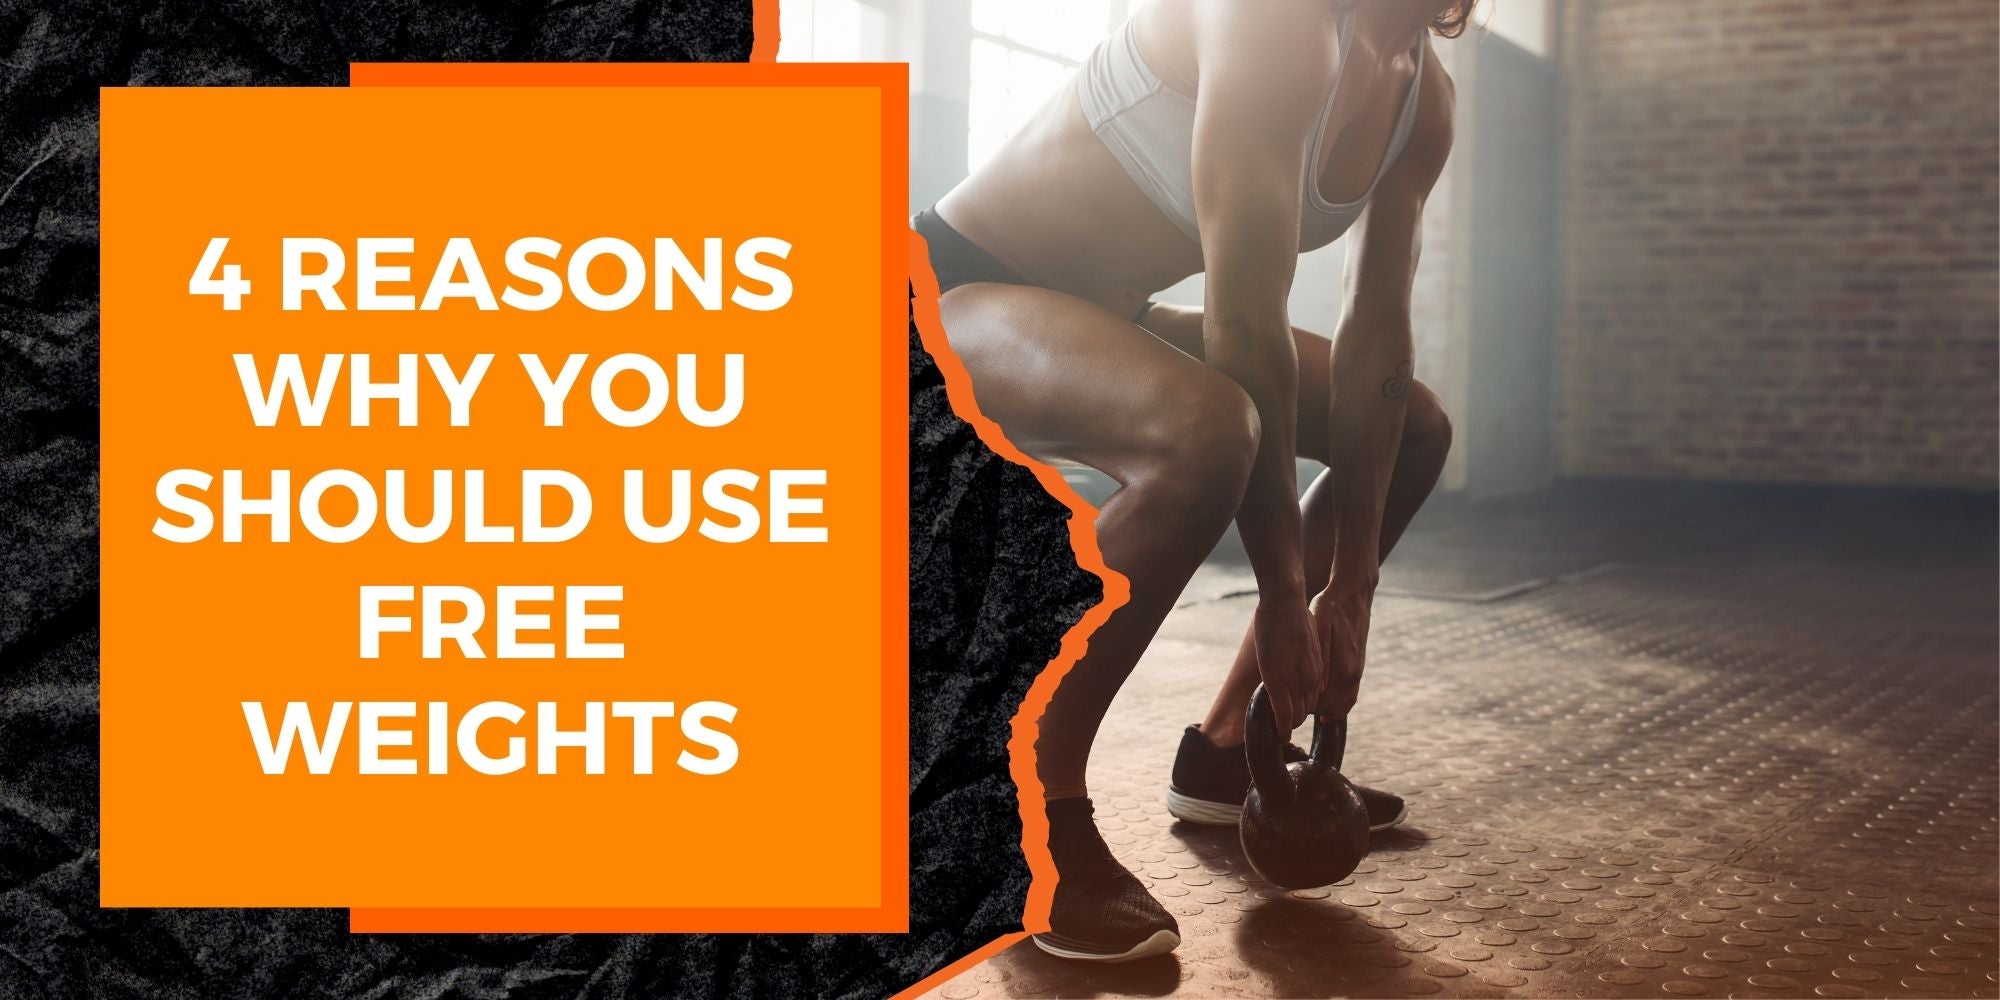 4 Reasons Why You Should Use Free Weights